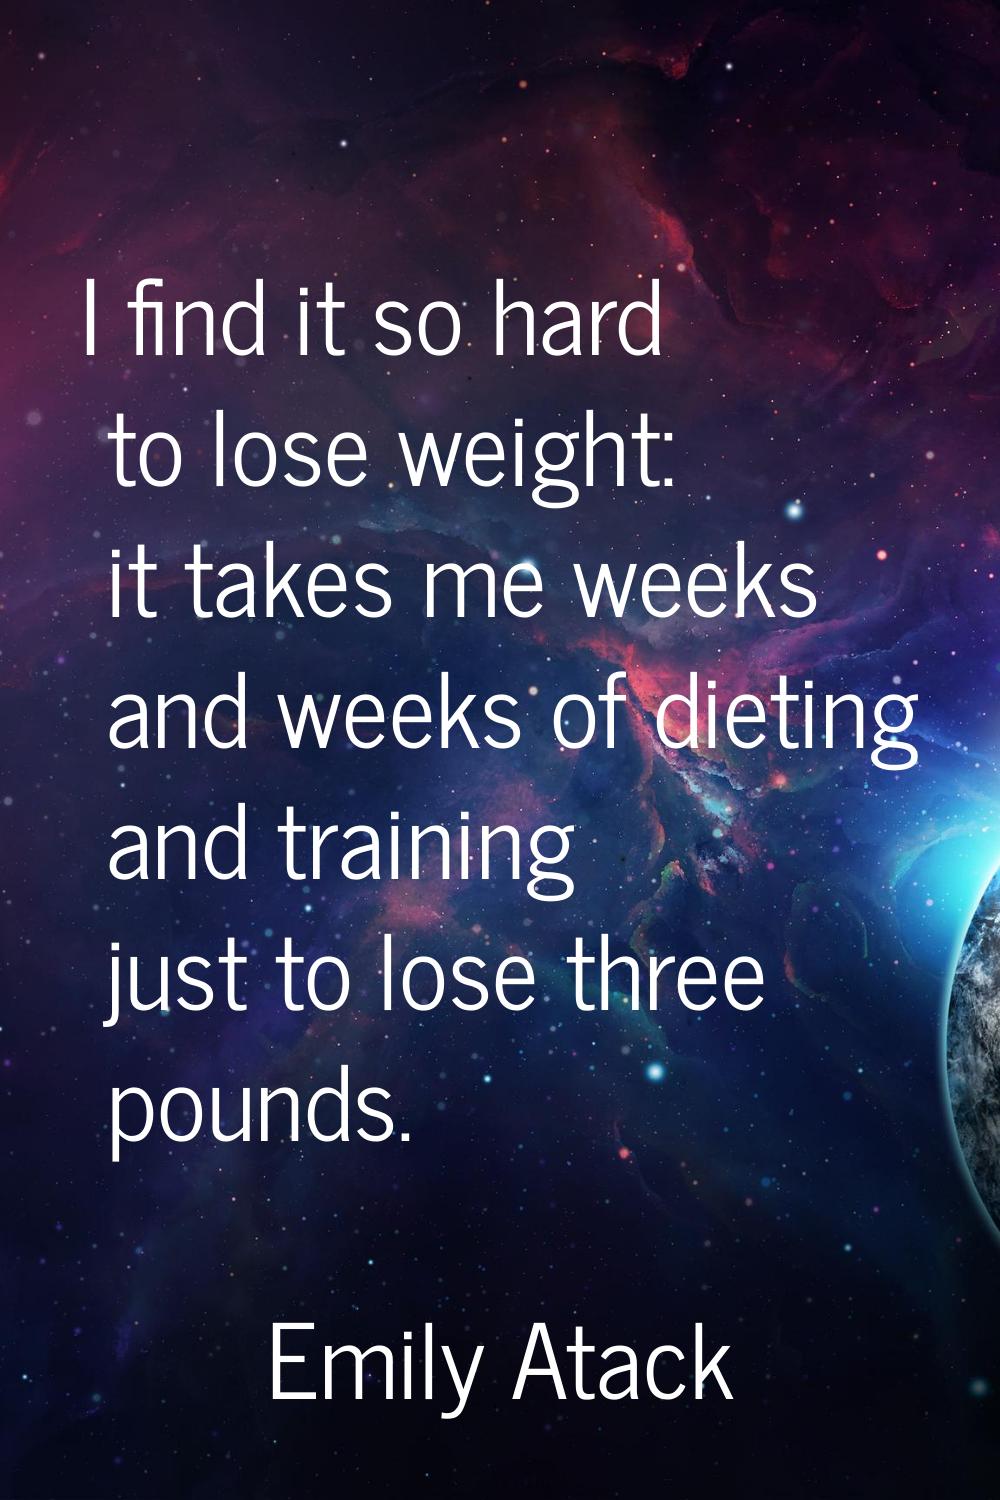 I find it so hard to lose weight: it takes me weeks and weeks of dieting and training just to lose 